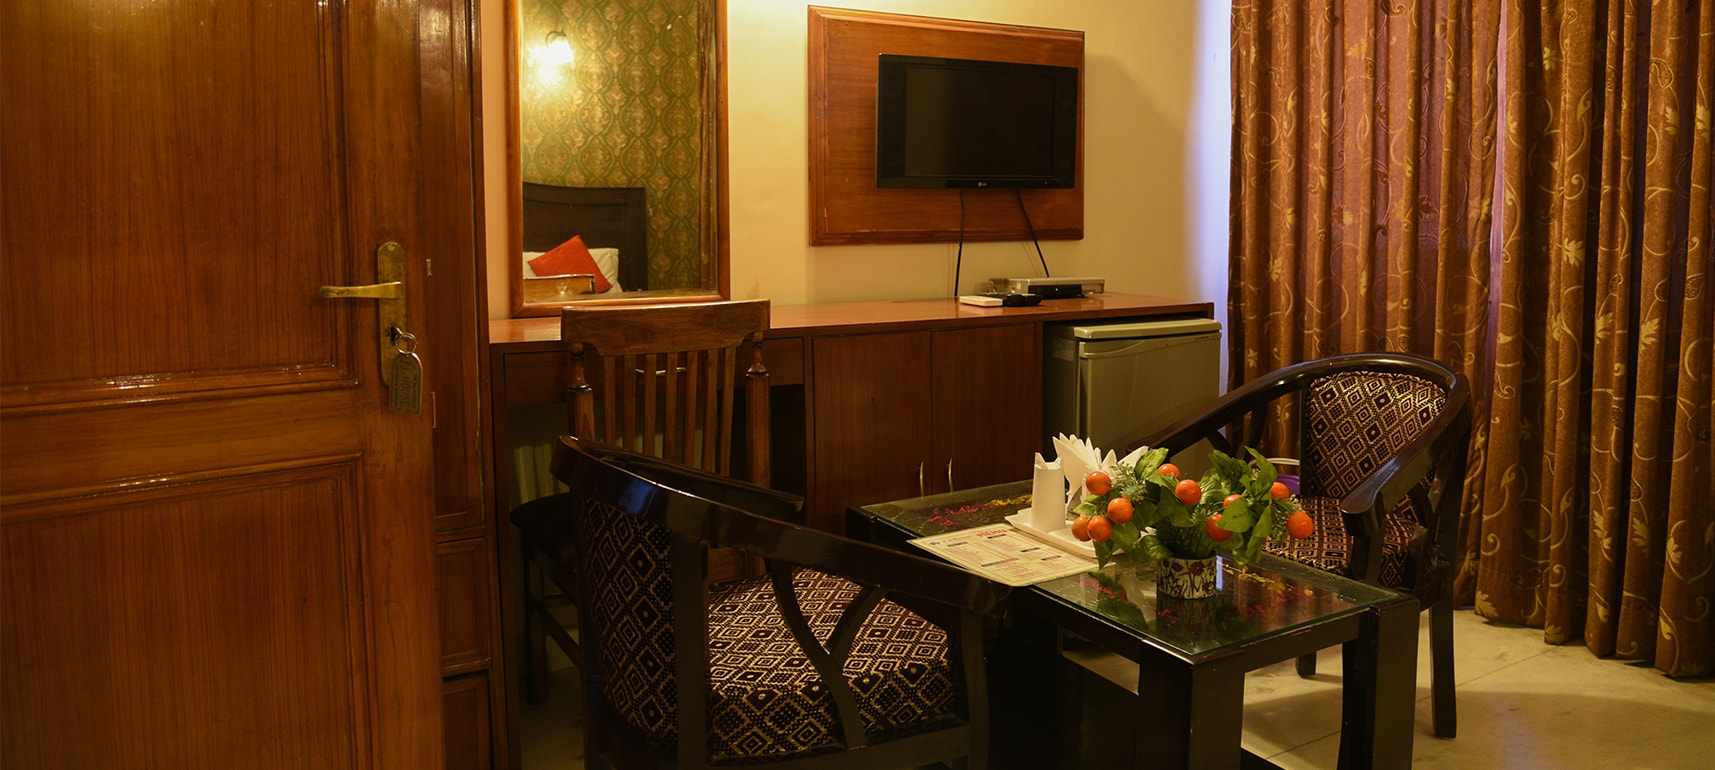 Best Guest House in Gurgaon, Sector 27 - JJ Guest House